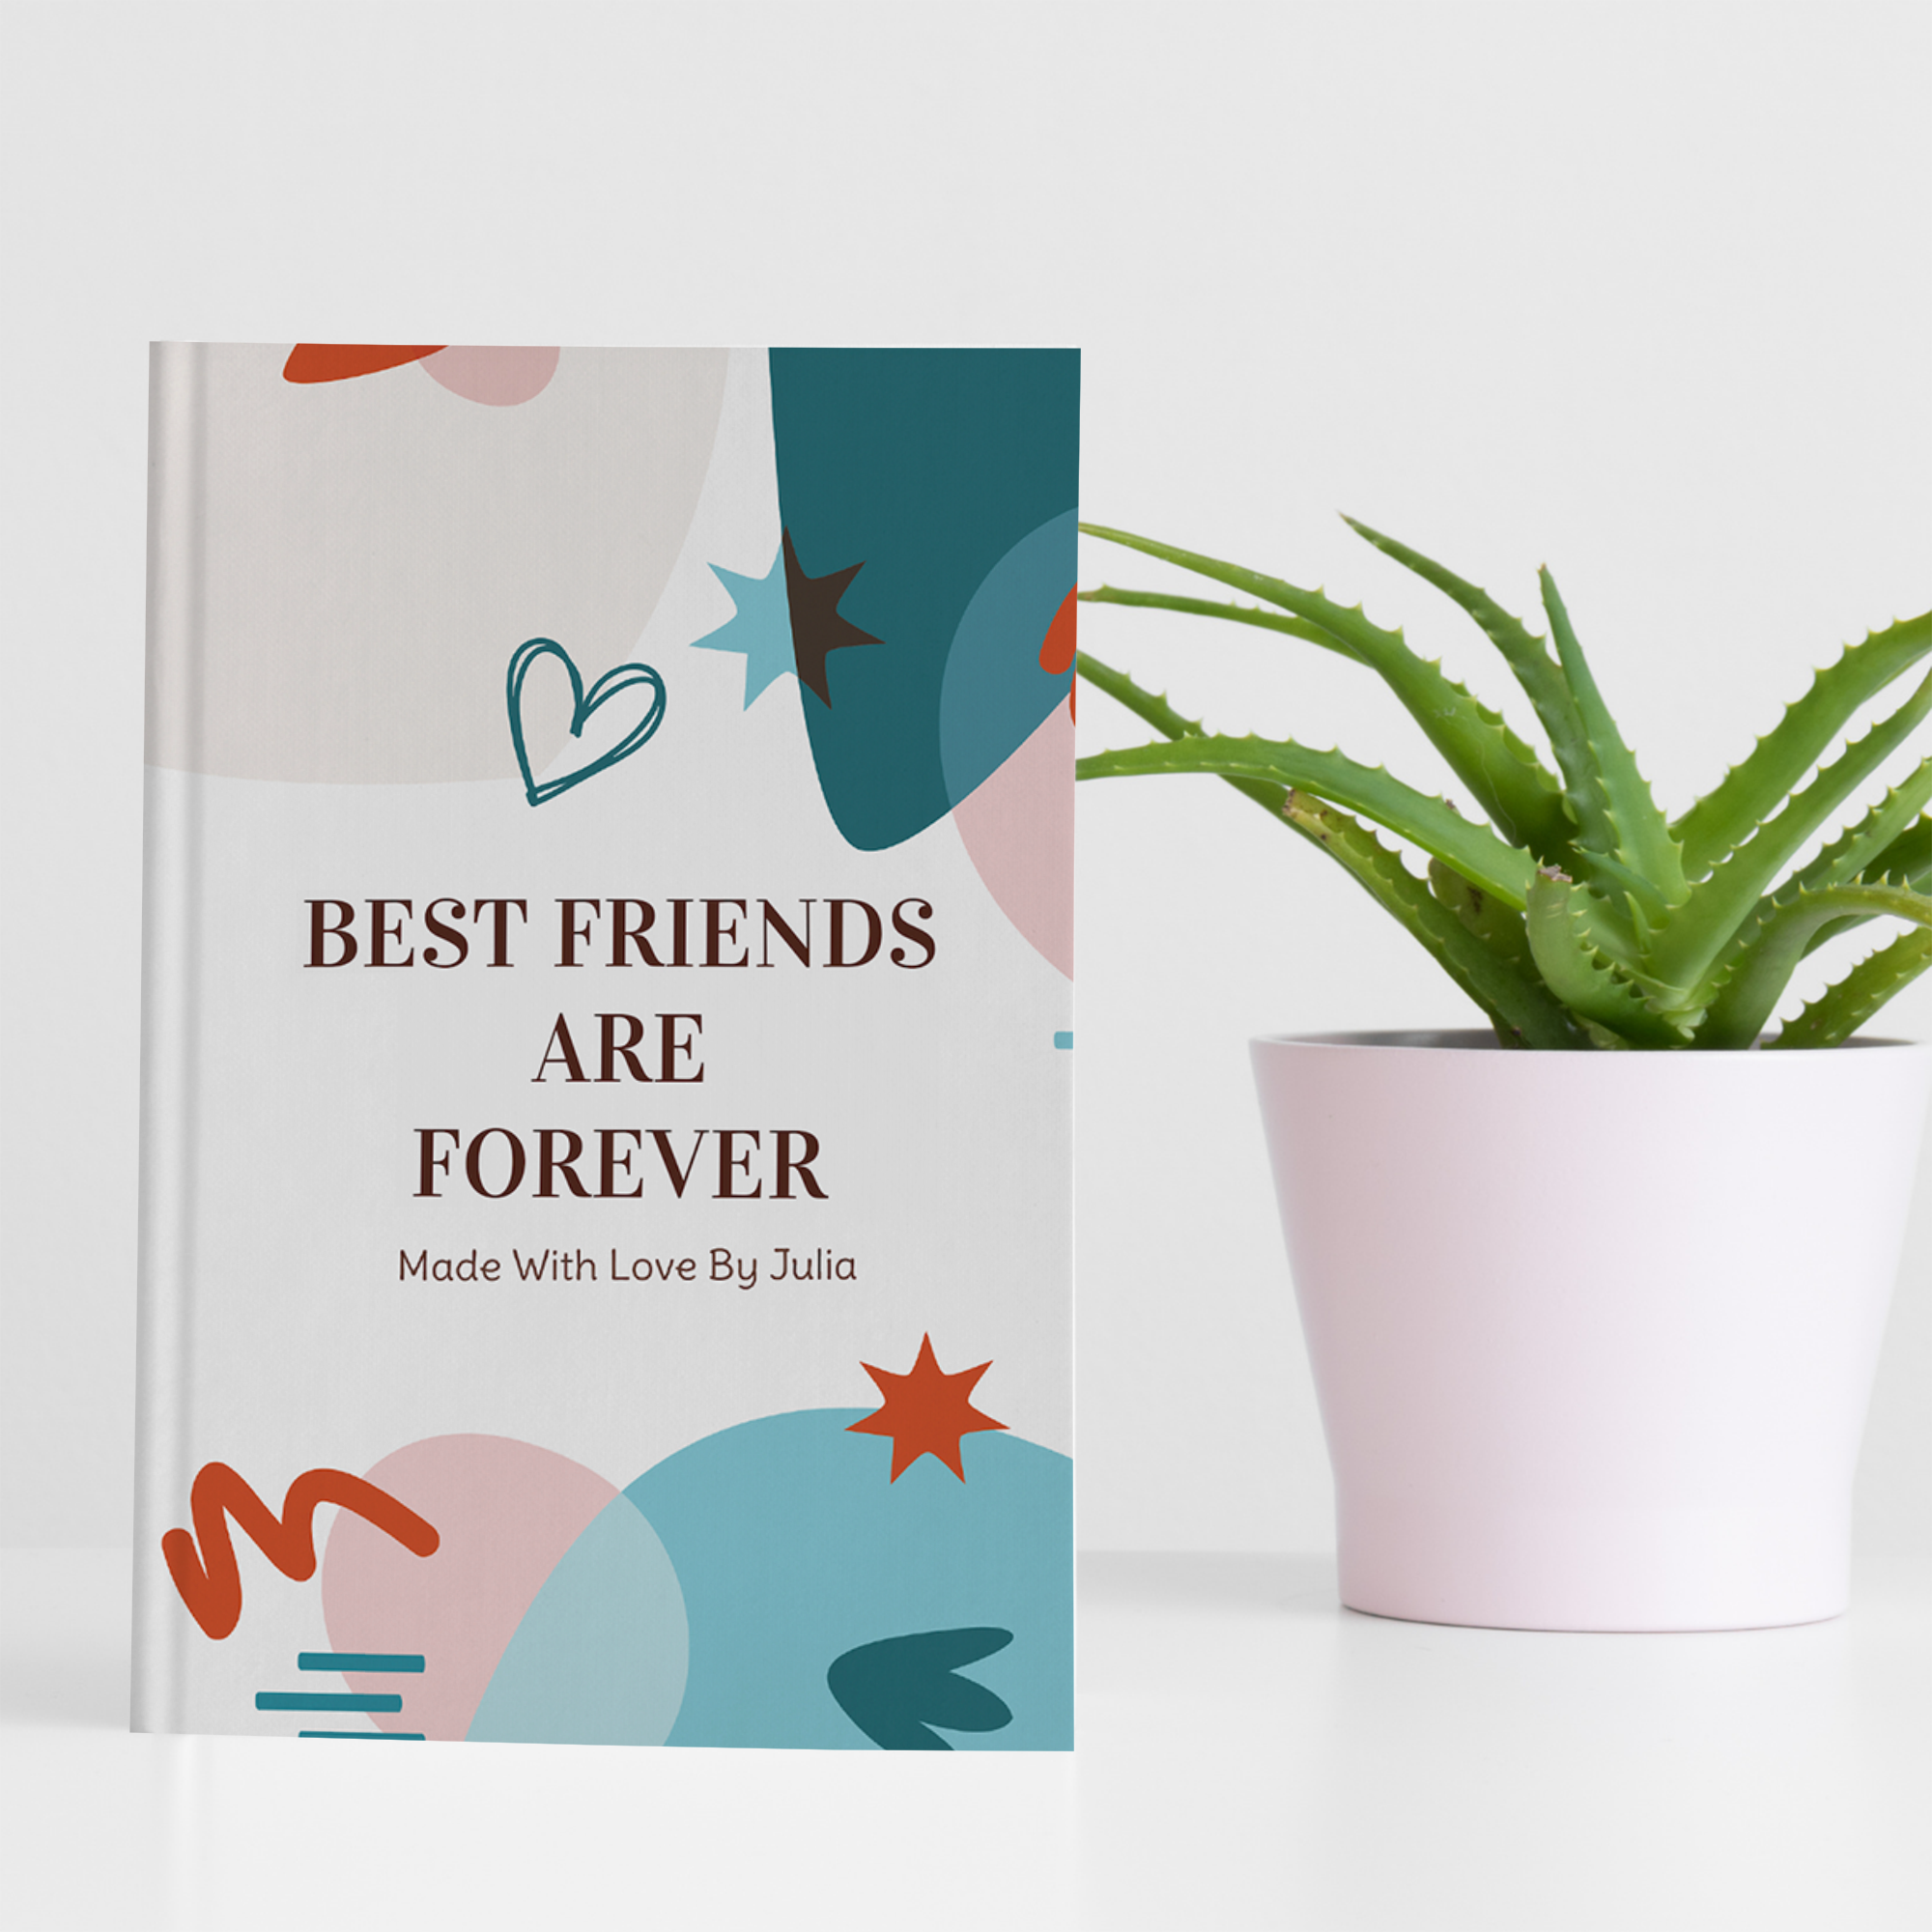 Gift books: For the friend who's read more books than you